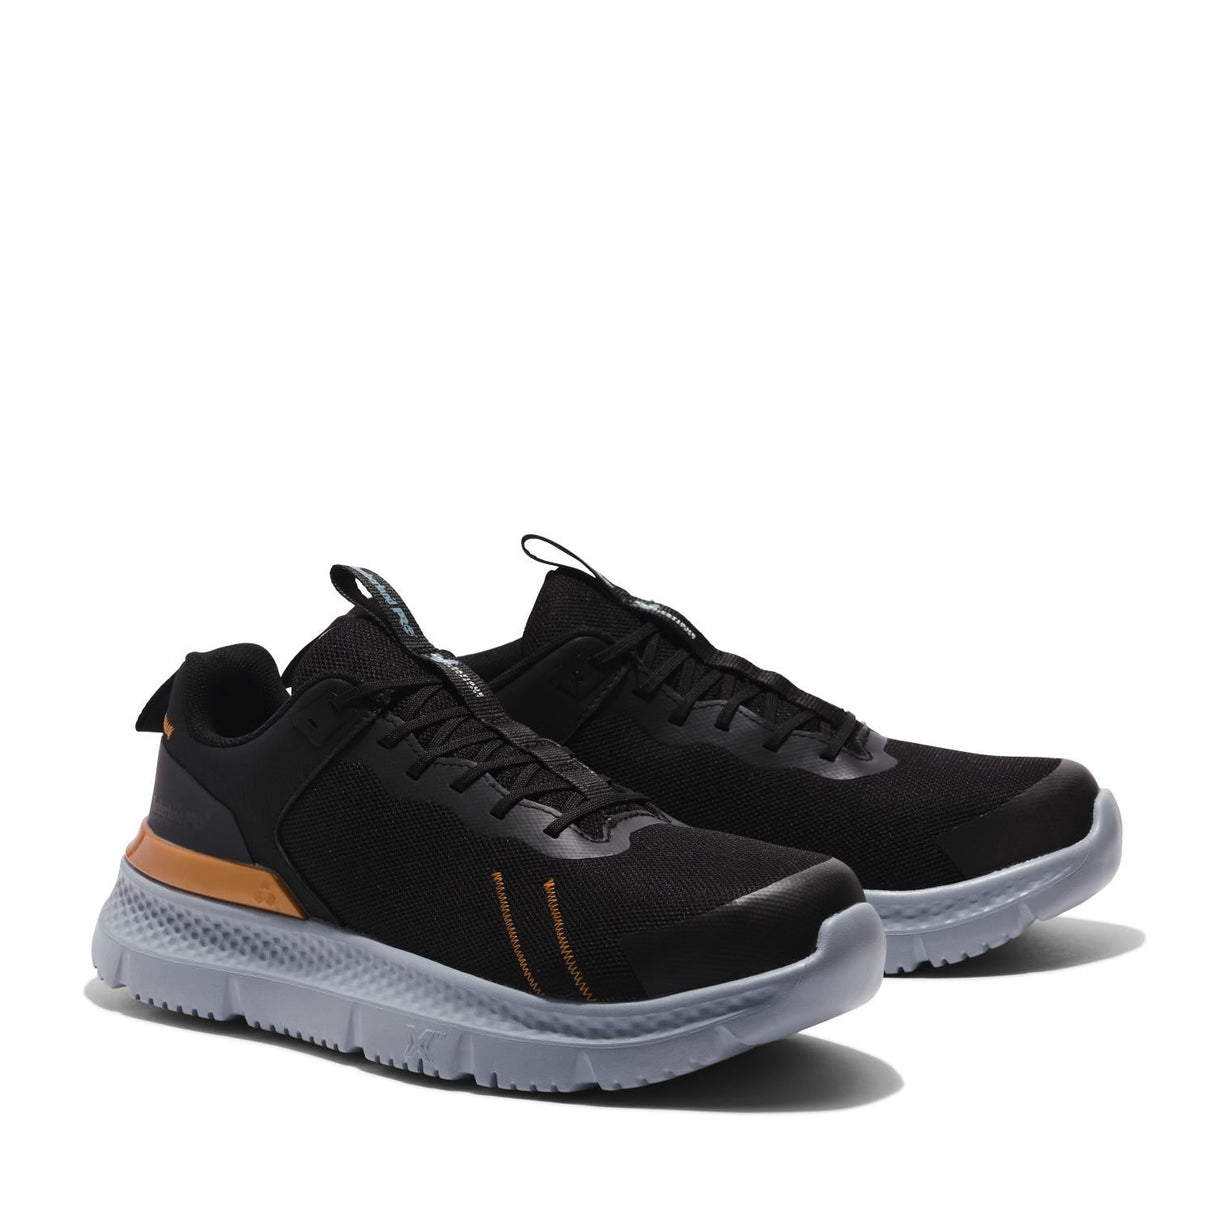 Timberland Pro-Setra Composite-Toe Black-Steel Toes-5